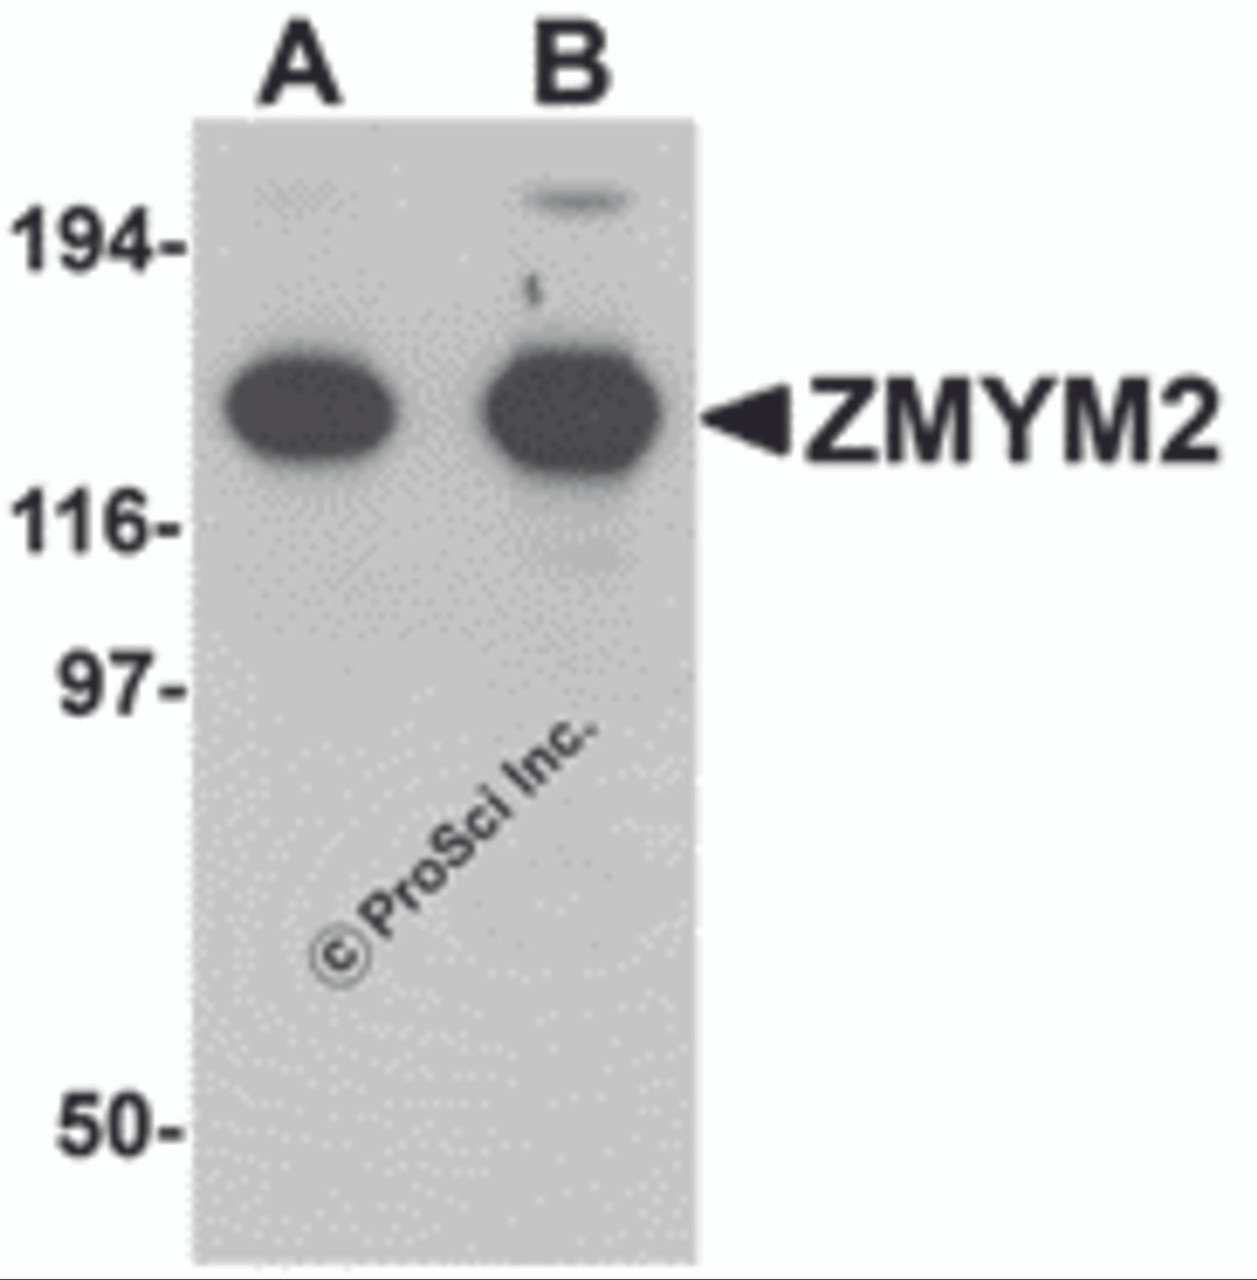 Western blot analysis of ZMYM2 in EL4 cell lysate with ZMYM2 antibody at (A) 0.125 and (B) 0.25 &#956;g/mL.